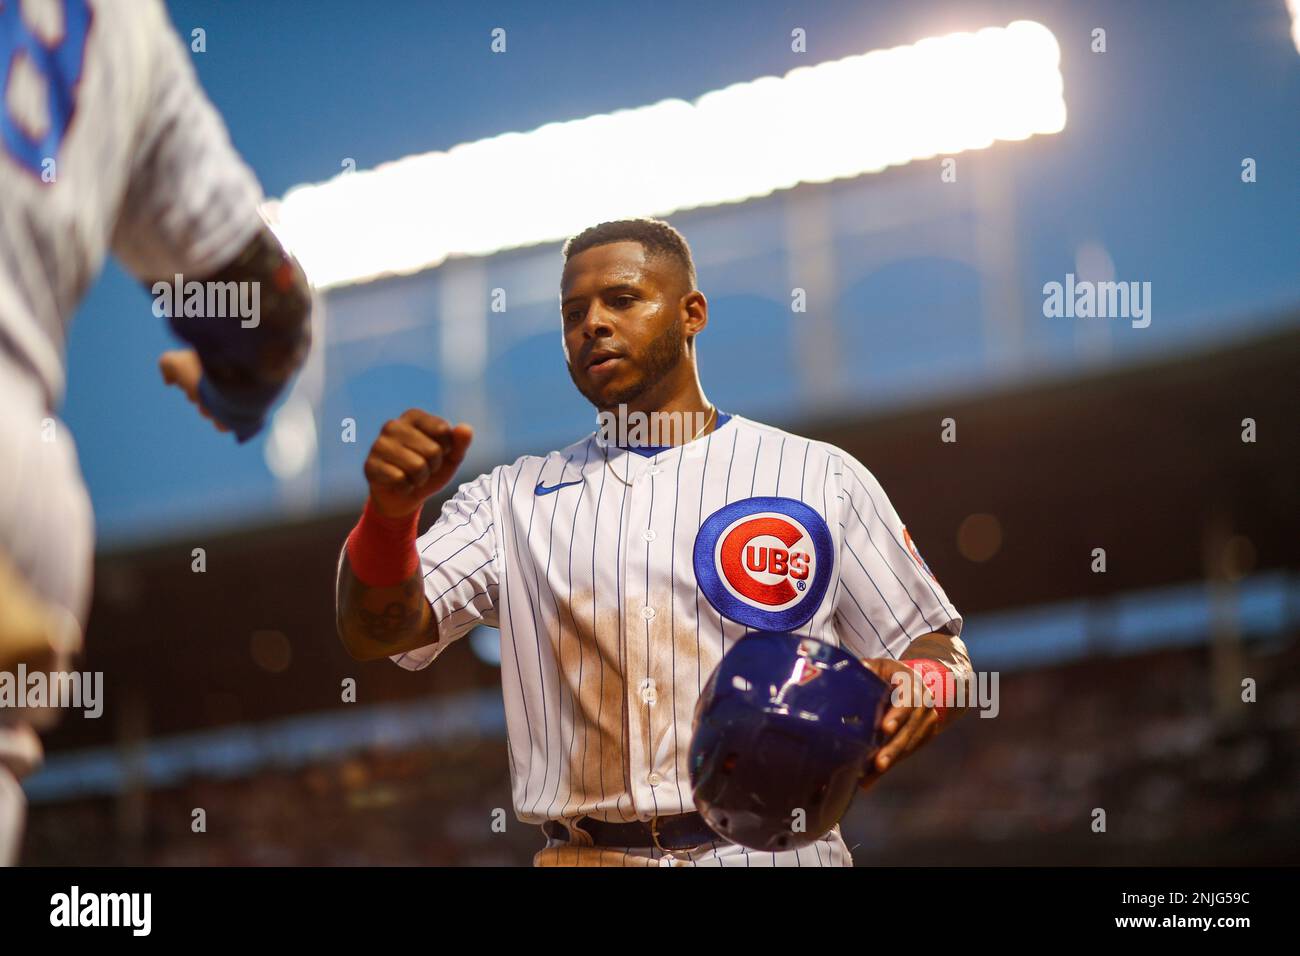 CHICAGO, IL - AUGUST 24: Chicago Cubs center fielder Nelson Velazquez (4)  walks off the field at the end of the second inning during a regular season  game between the St. Louis